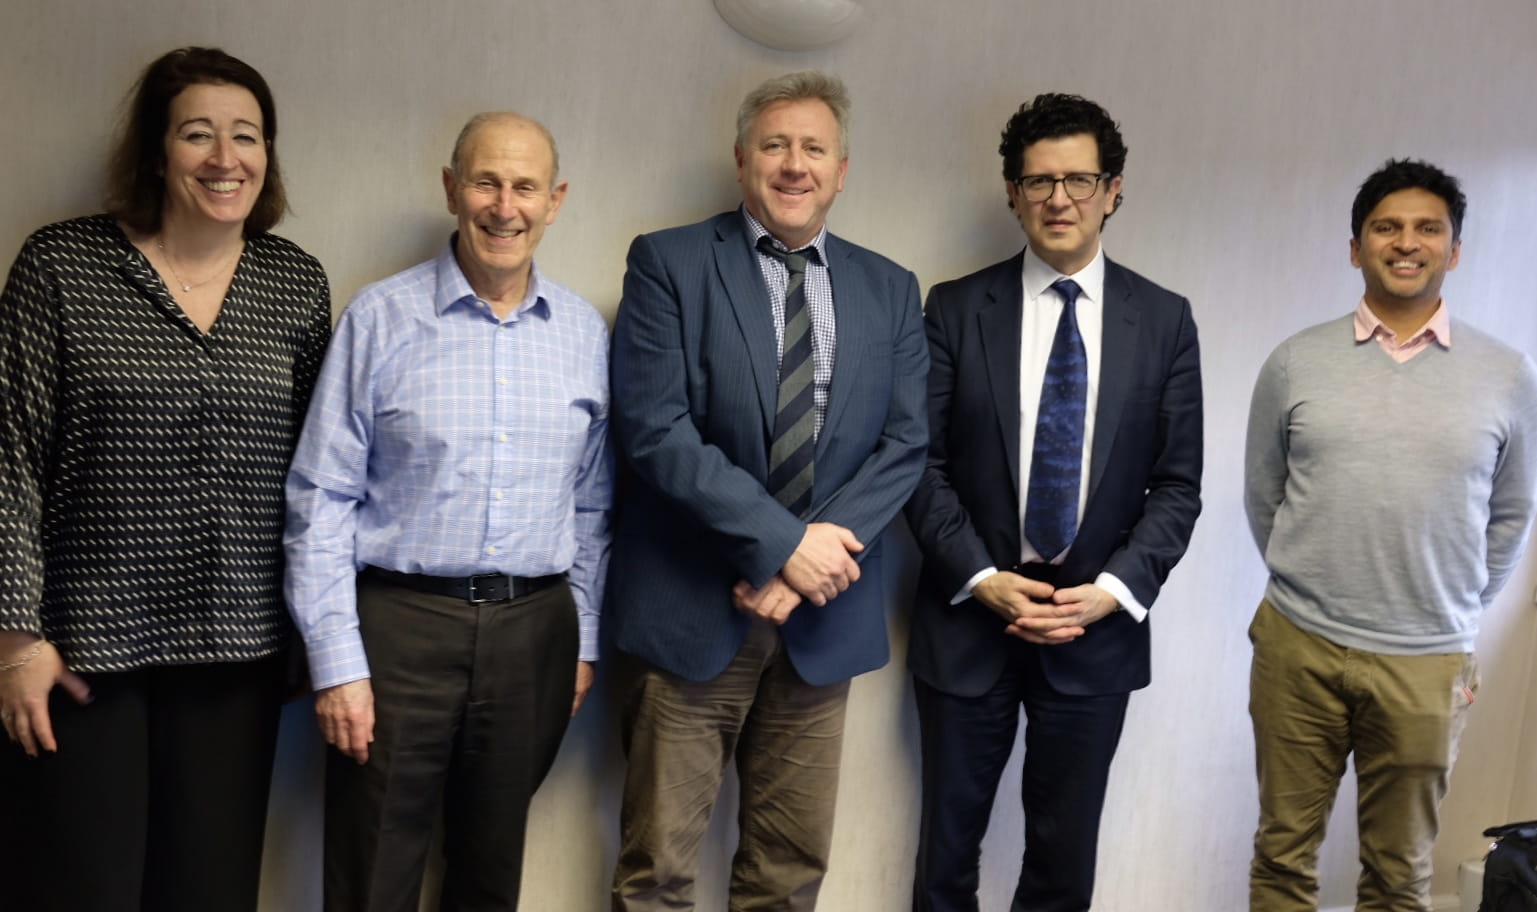 The Rosetrees Trust and the University of Oxford are long-standing supporters of research at the RCS. From left to right: Ann Berger from Rosetrees Trust, Richard Ross from Rosetrees Trust, Professor David Beard, Professor Michael Douek and Vineeth Rajkumar from Rosetrees Trust